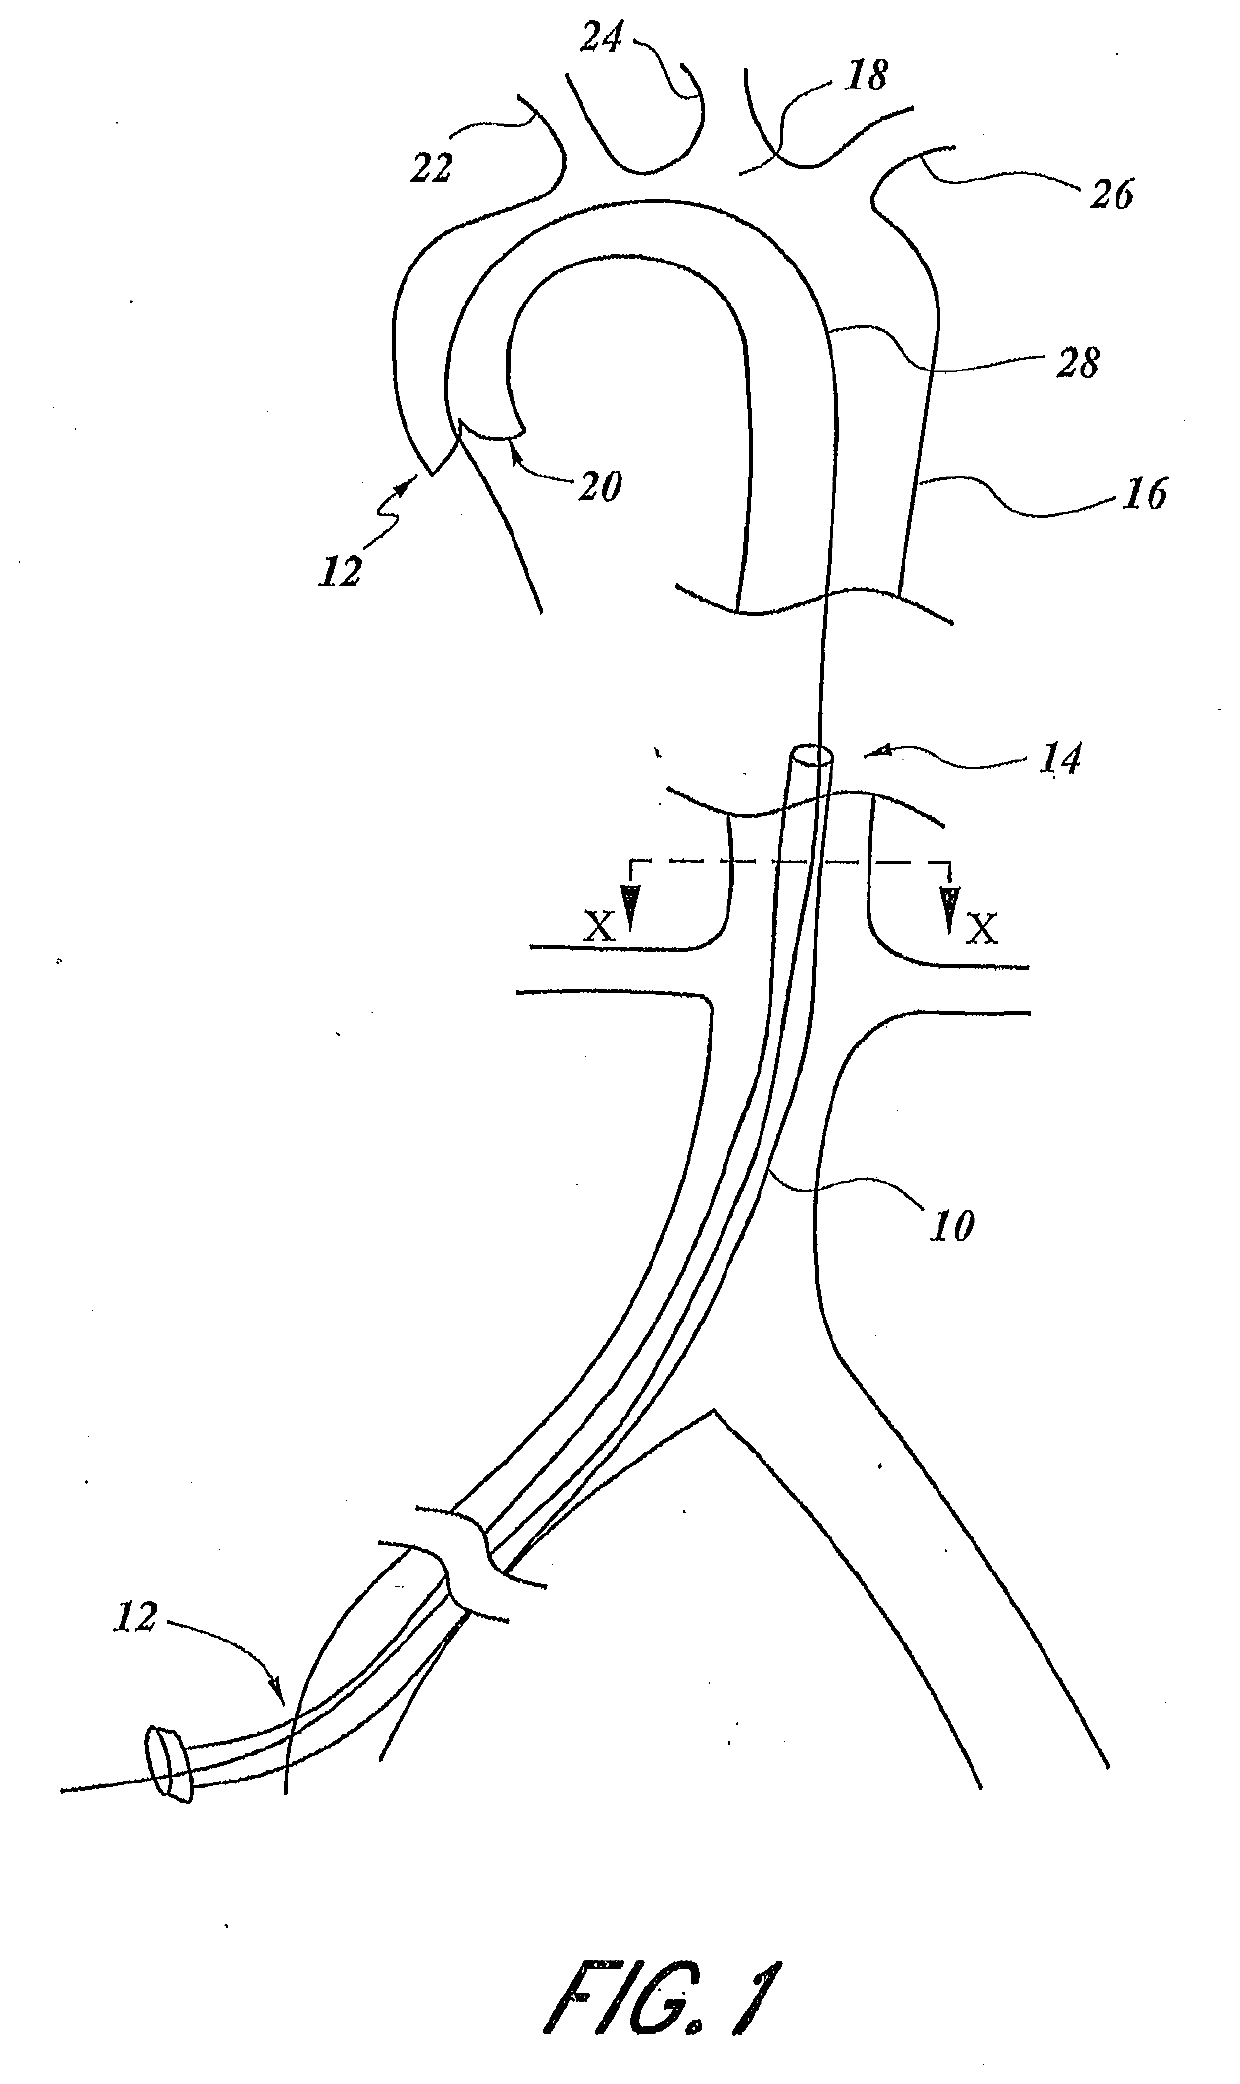 Embolic protection access system